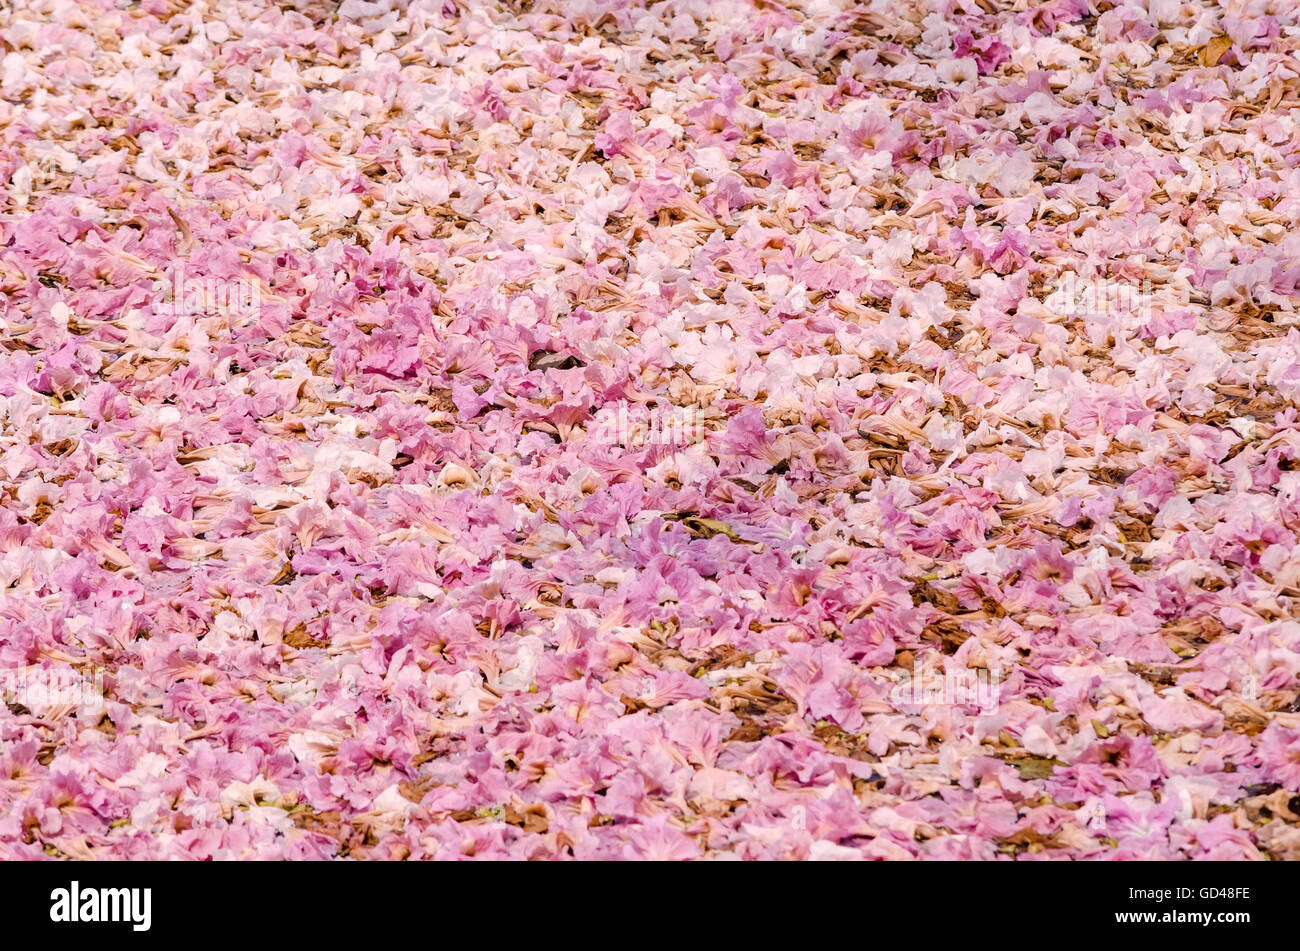 Texture of Tabebuia rosea on the ground, pink flower, fallen flower. Stock Photo